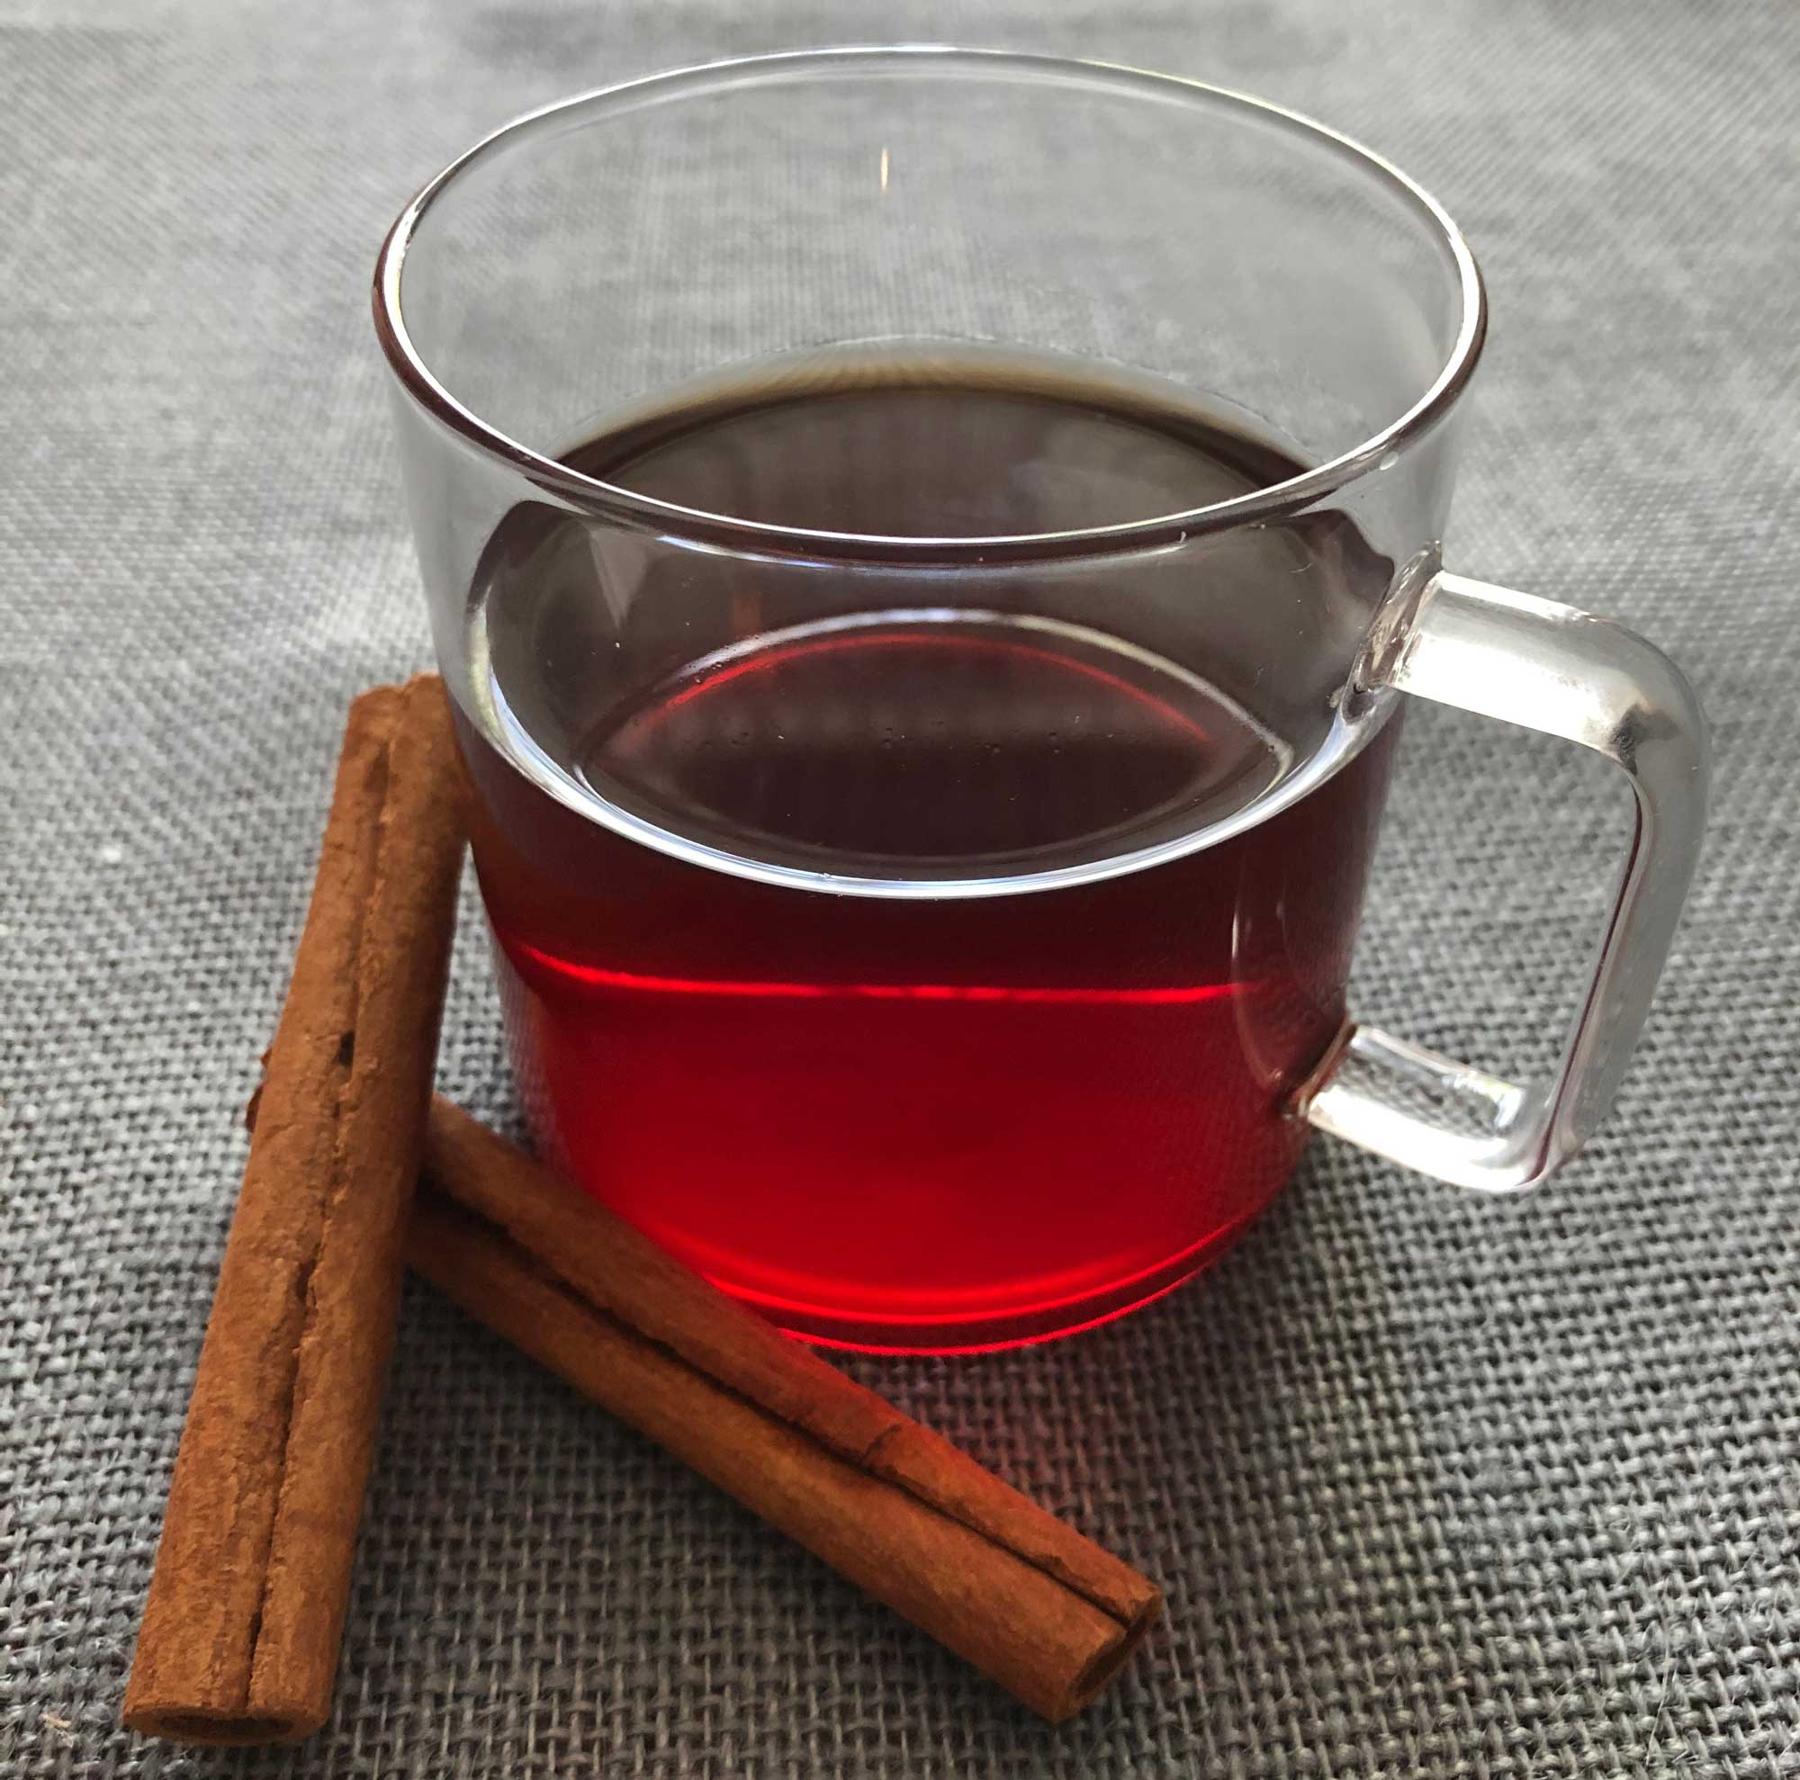 An example of the Simply Red, the mixed drink (drink) featuring rooibus (brewed), Averell Damson Plum Gin Liqueur, sugar, and cinnamon stick; photo by Lee Edwards